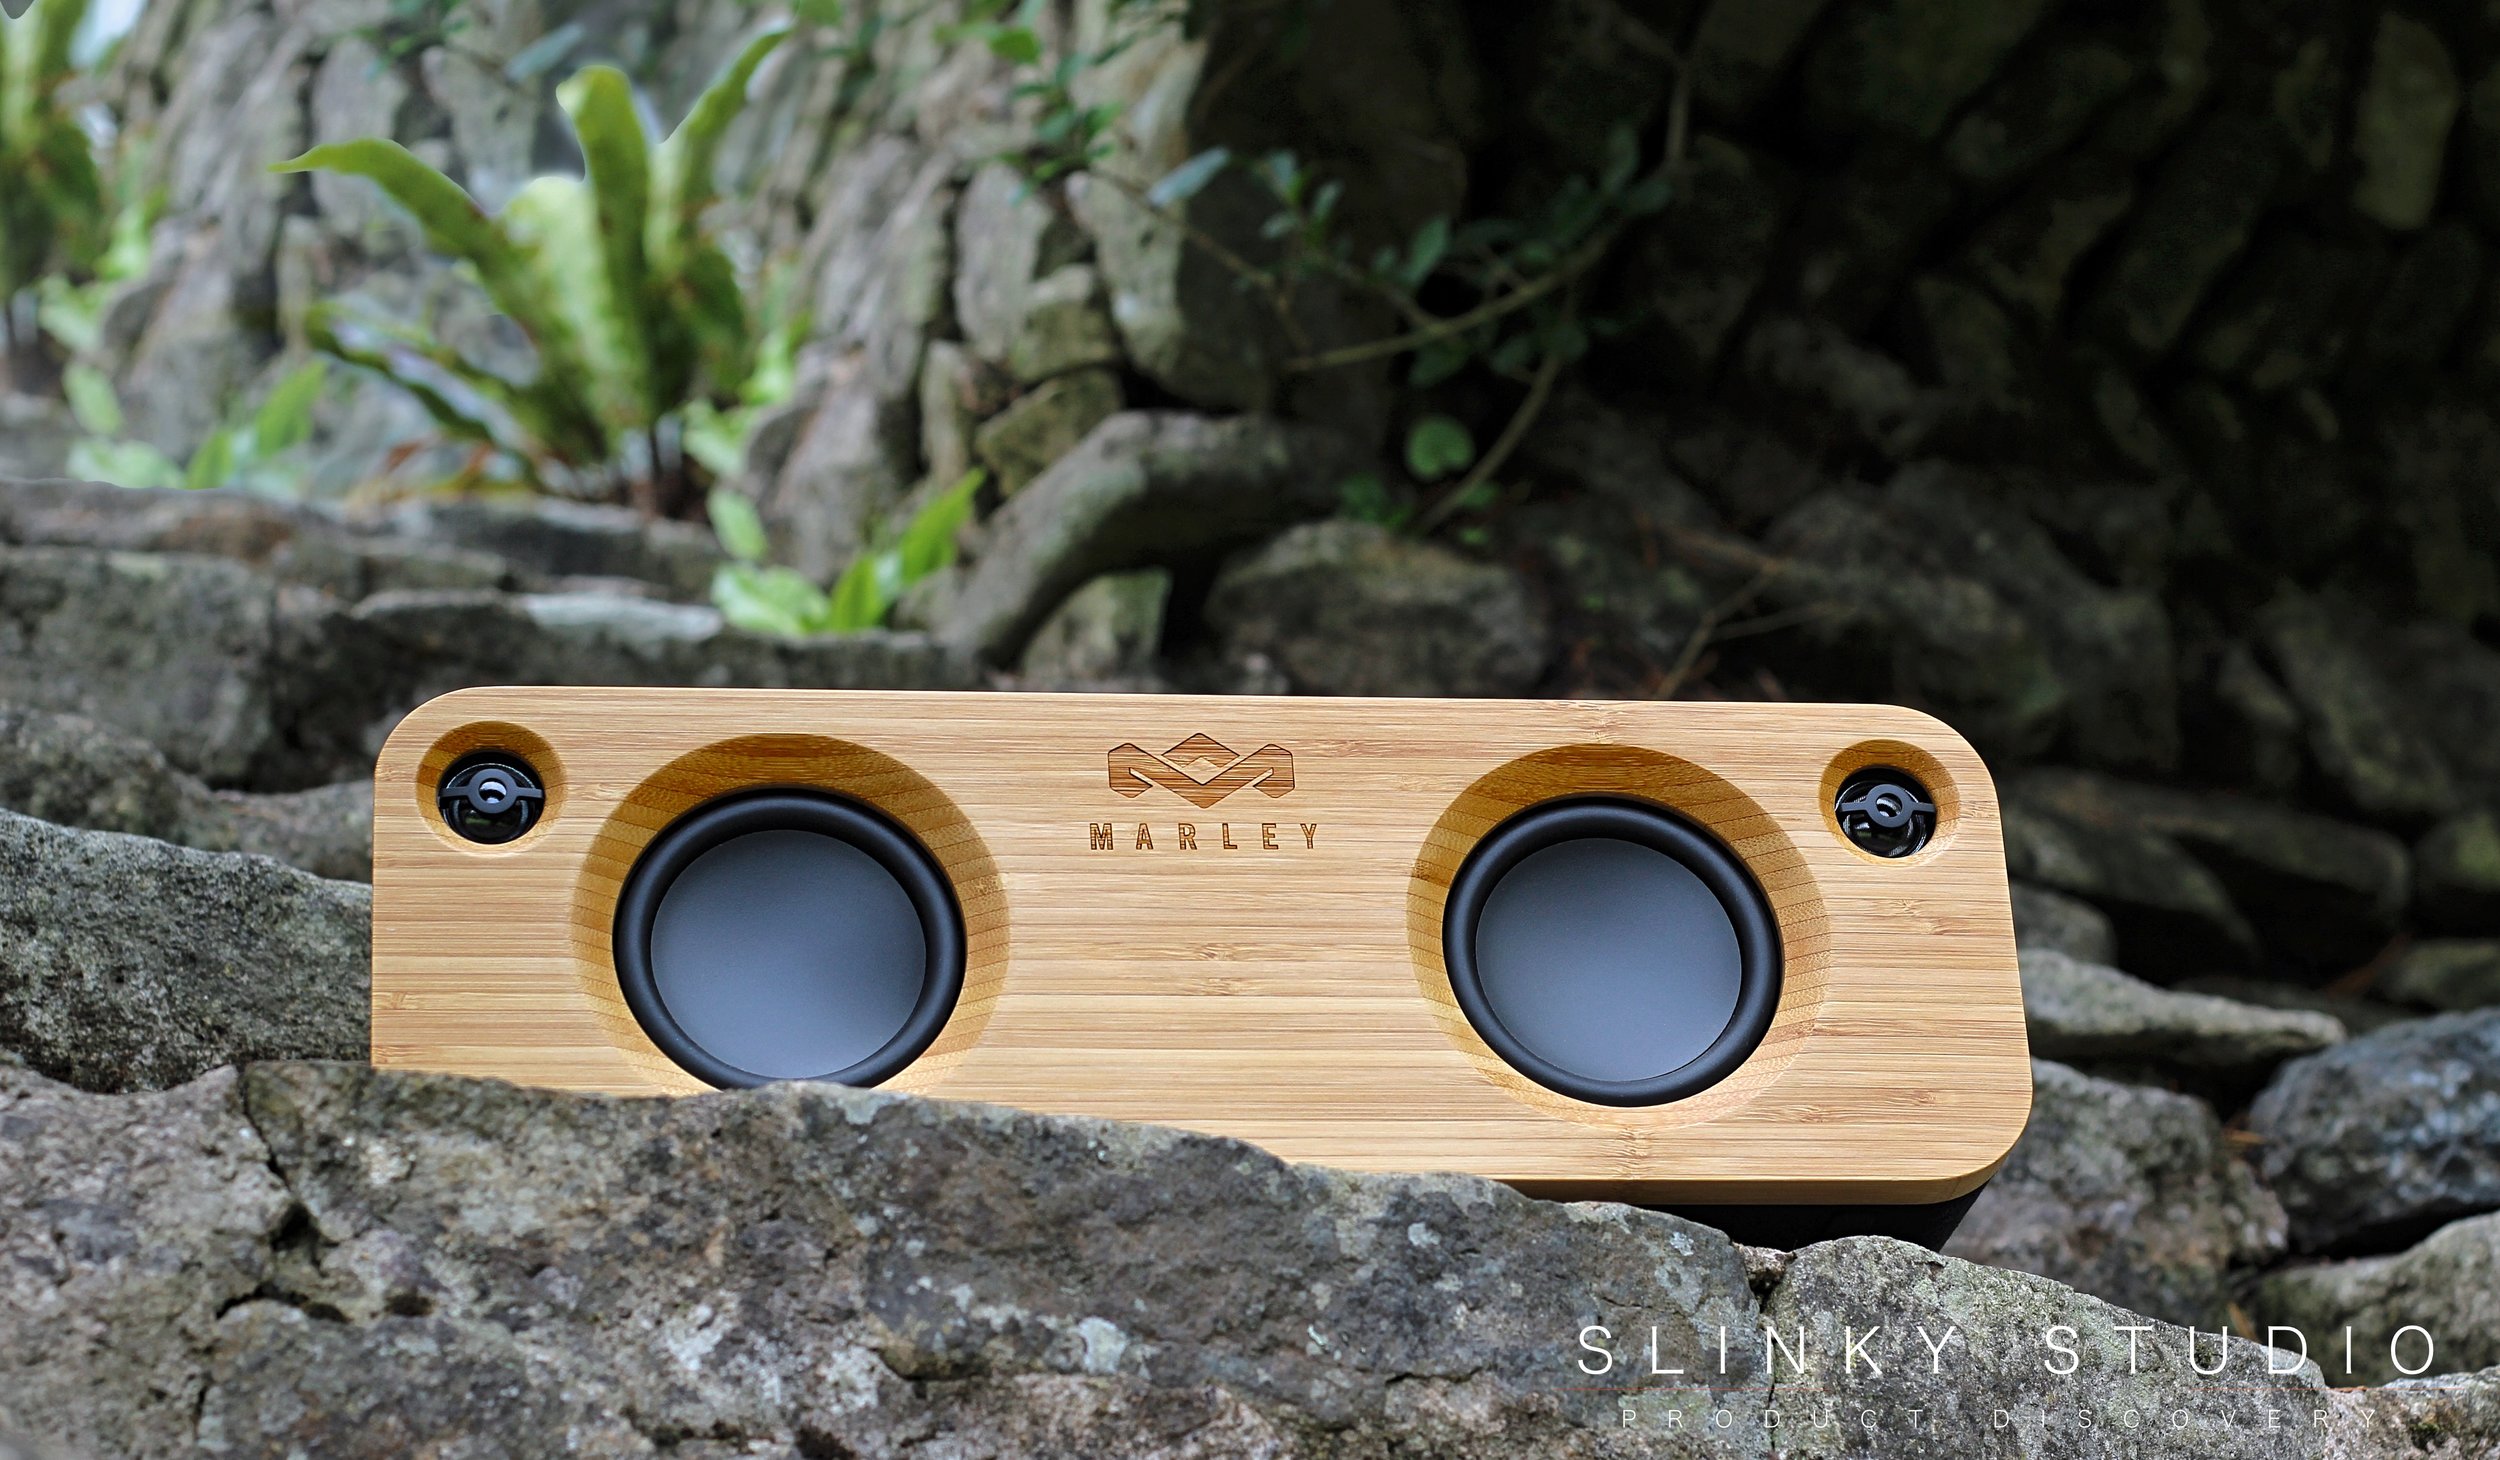 House of Marley Get Together Speaker Review: Soulful sound - Slinky Studio